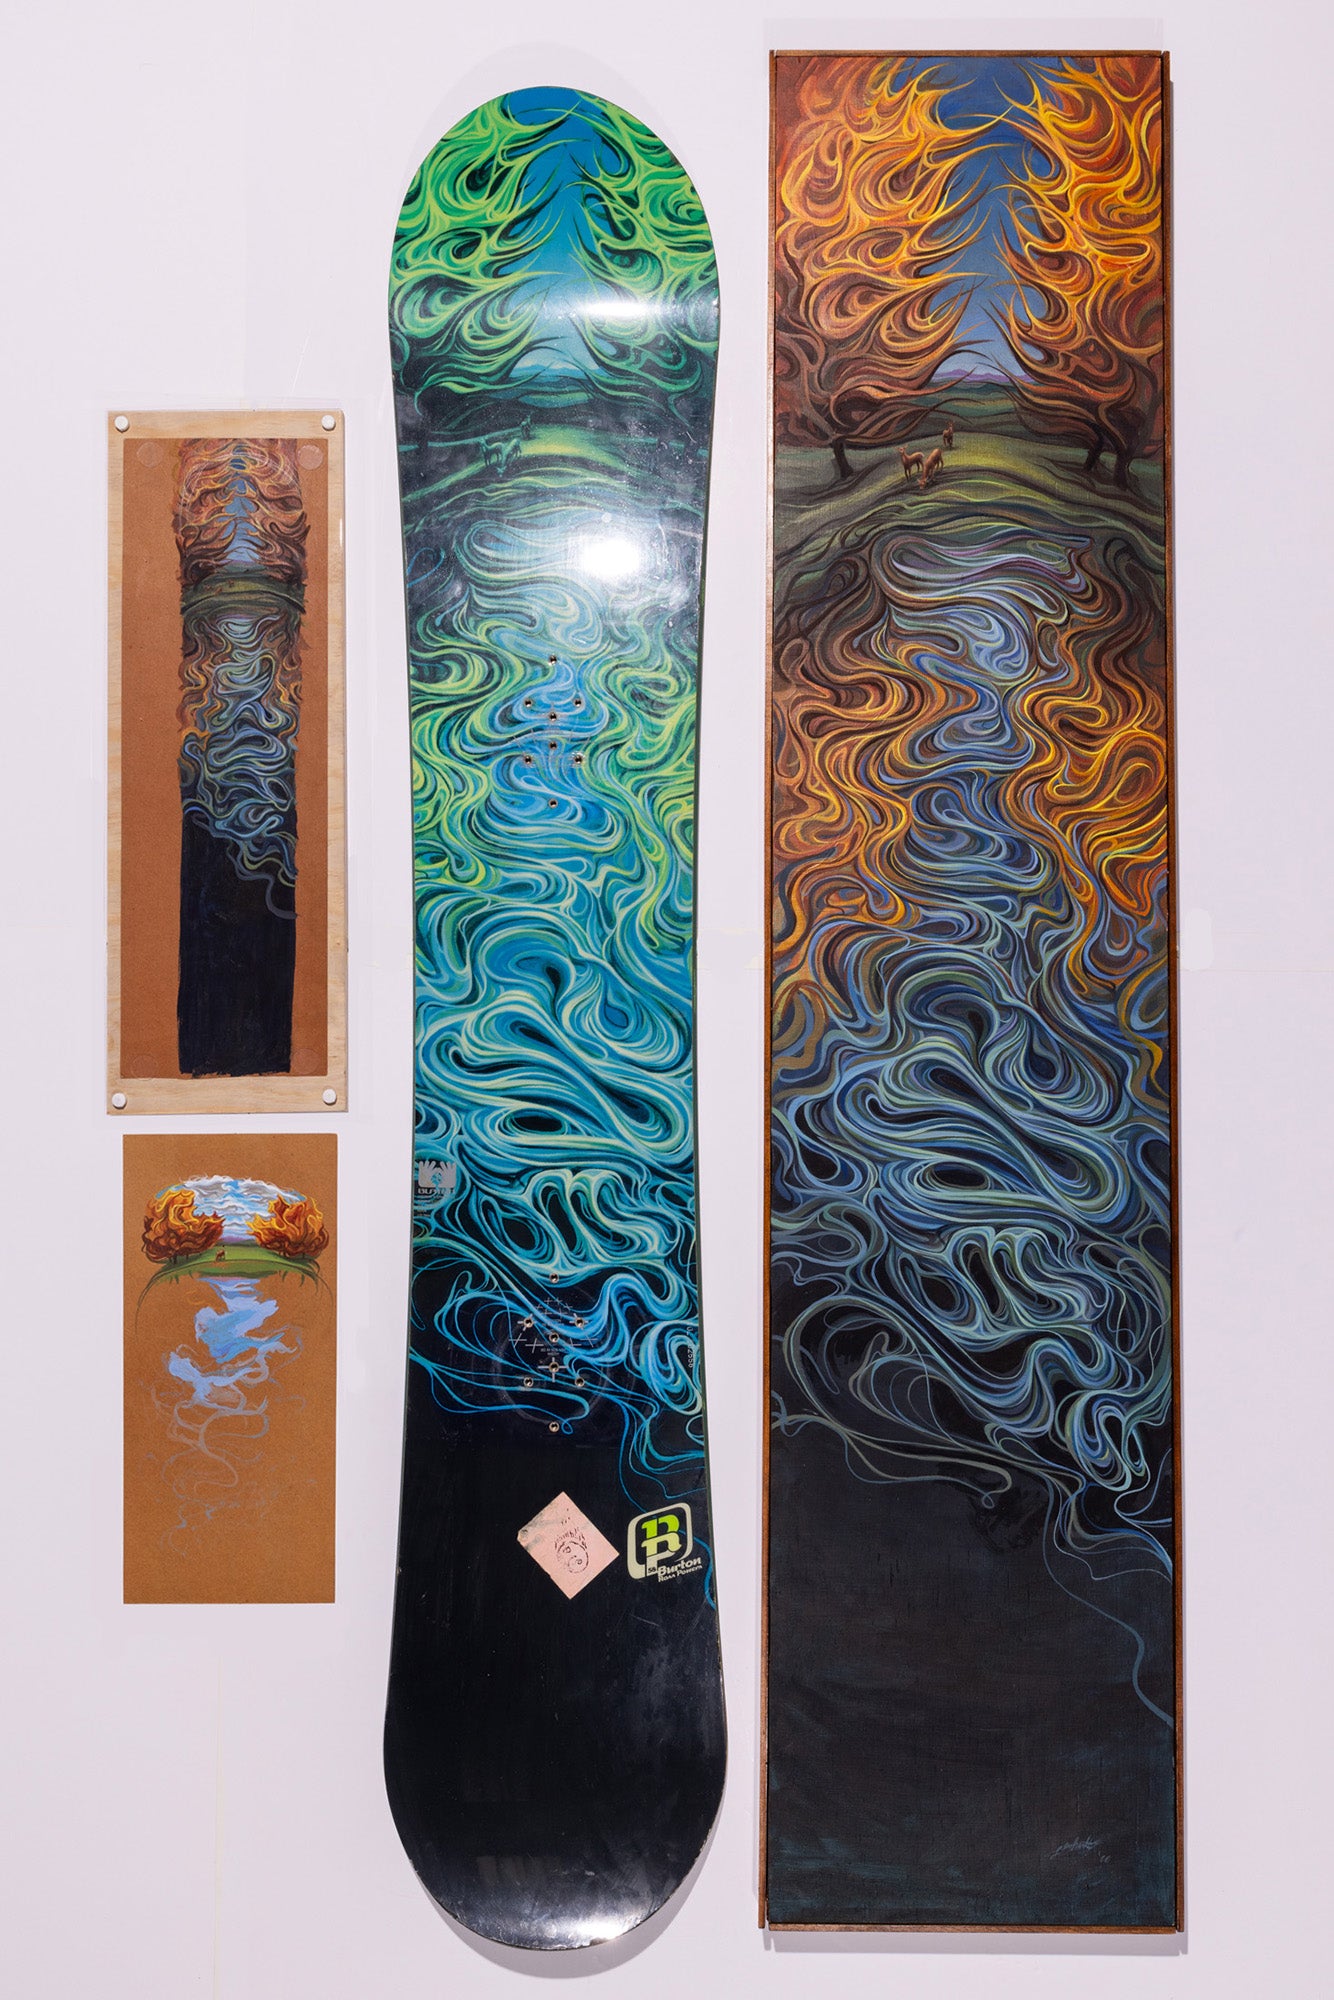 Scott Lenhardt, Ross Powers # 1 snowboard designed for Burton in 2001, {ridden by the artist} plus 2-acrylic on paper -sketches and an acrylic on wood panel signed on the bottom.